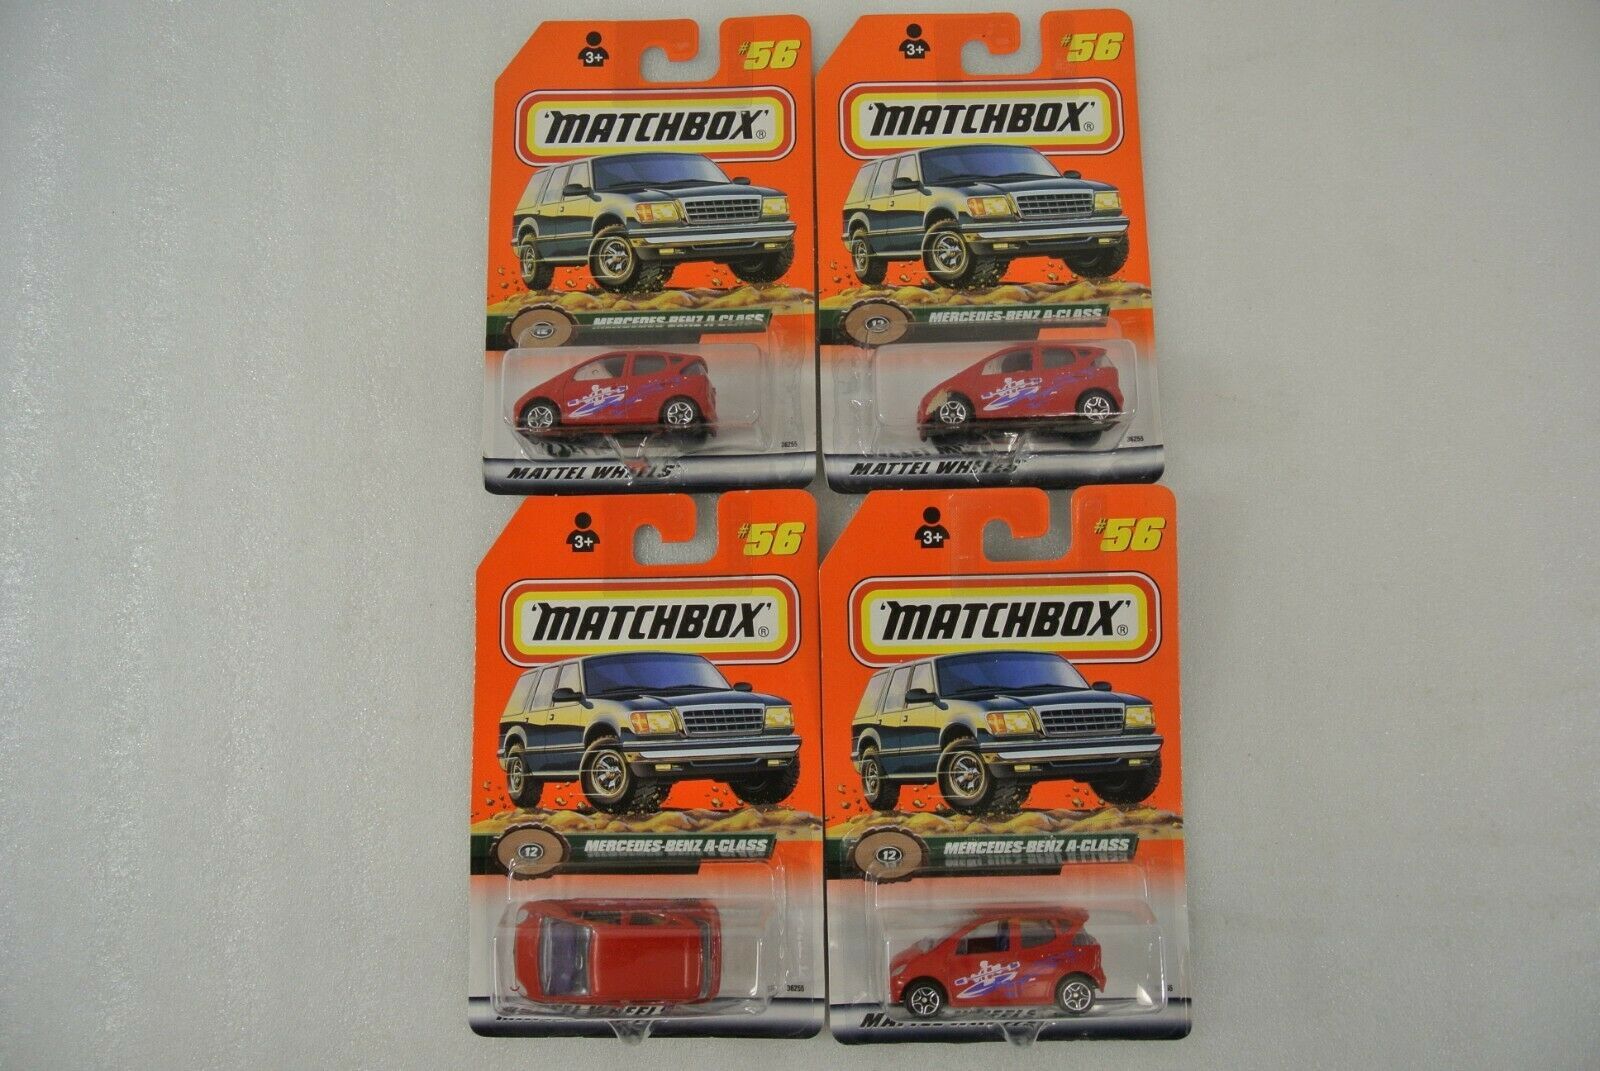 Primary image for Matchbox Mercedes-Benz A-Class #56 36255 New on Card Diecast Car Lot of 4 1998